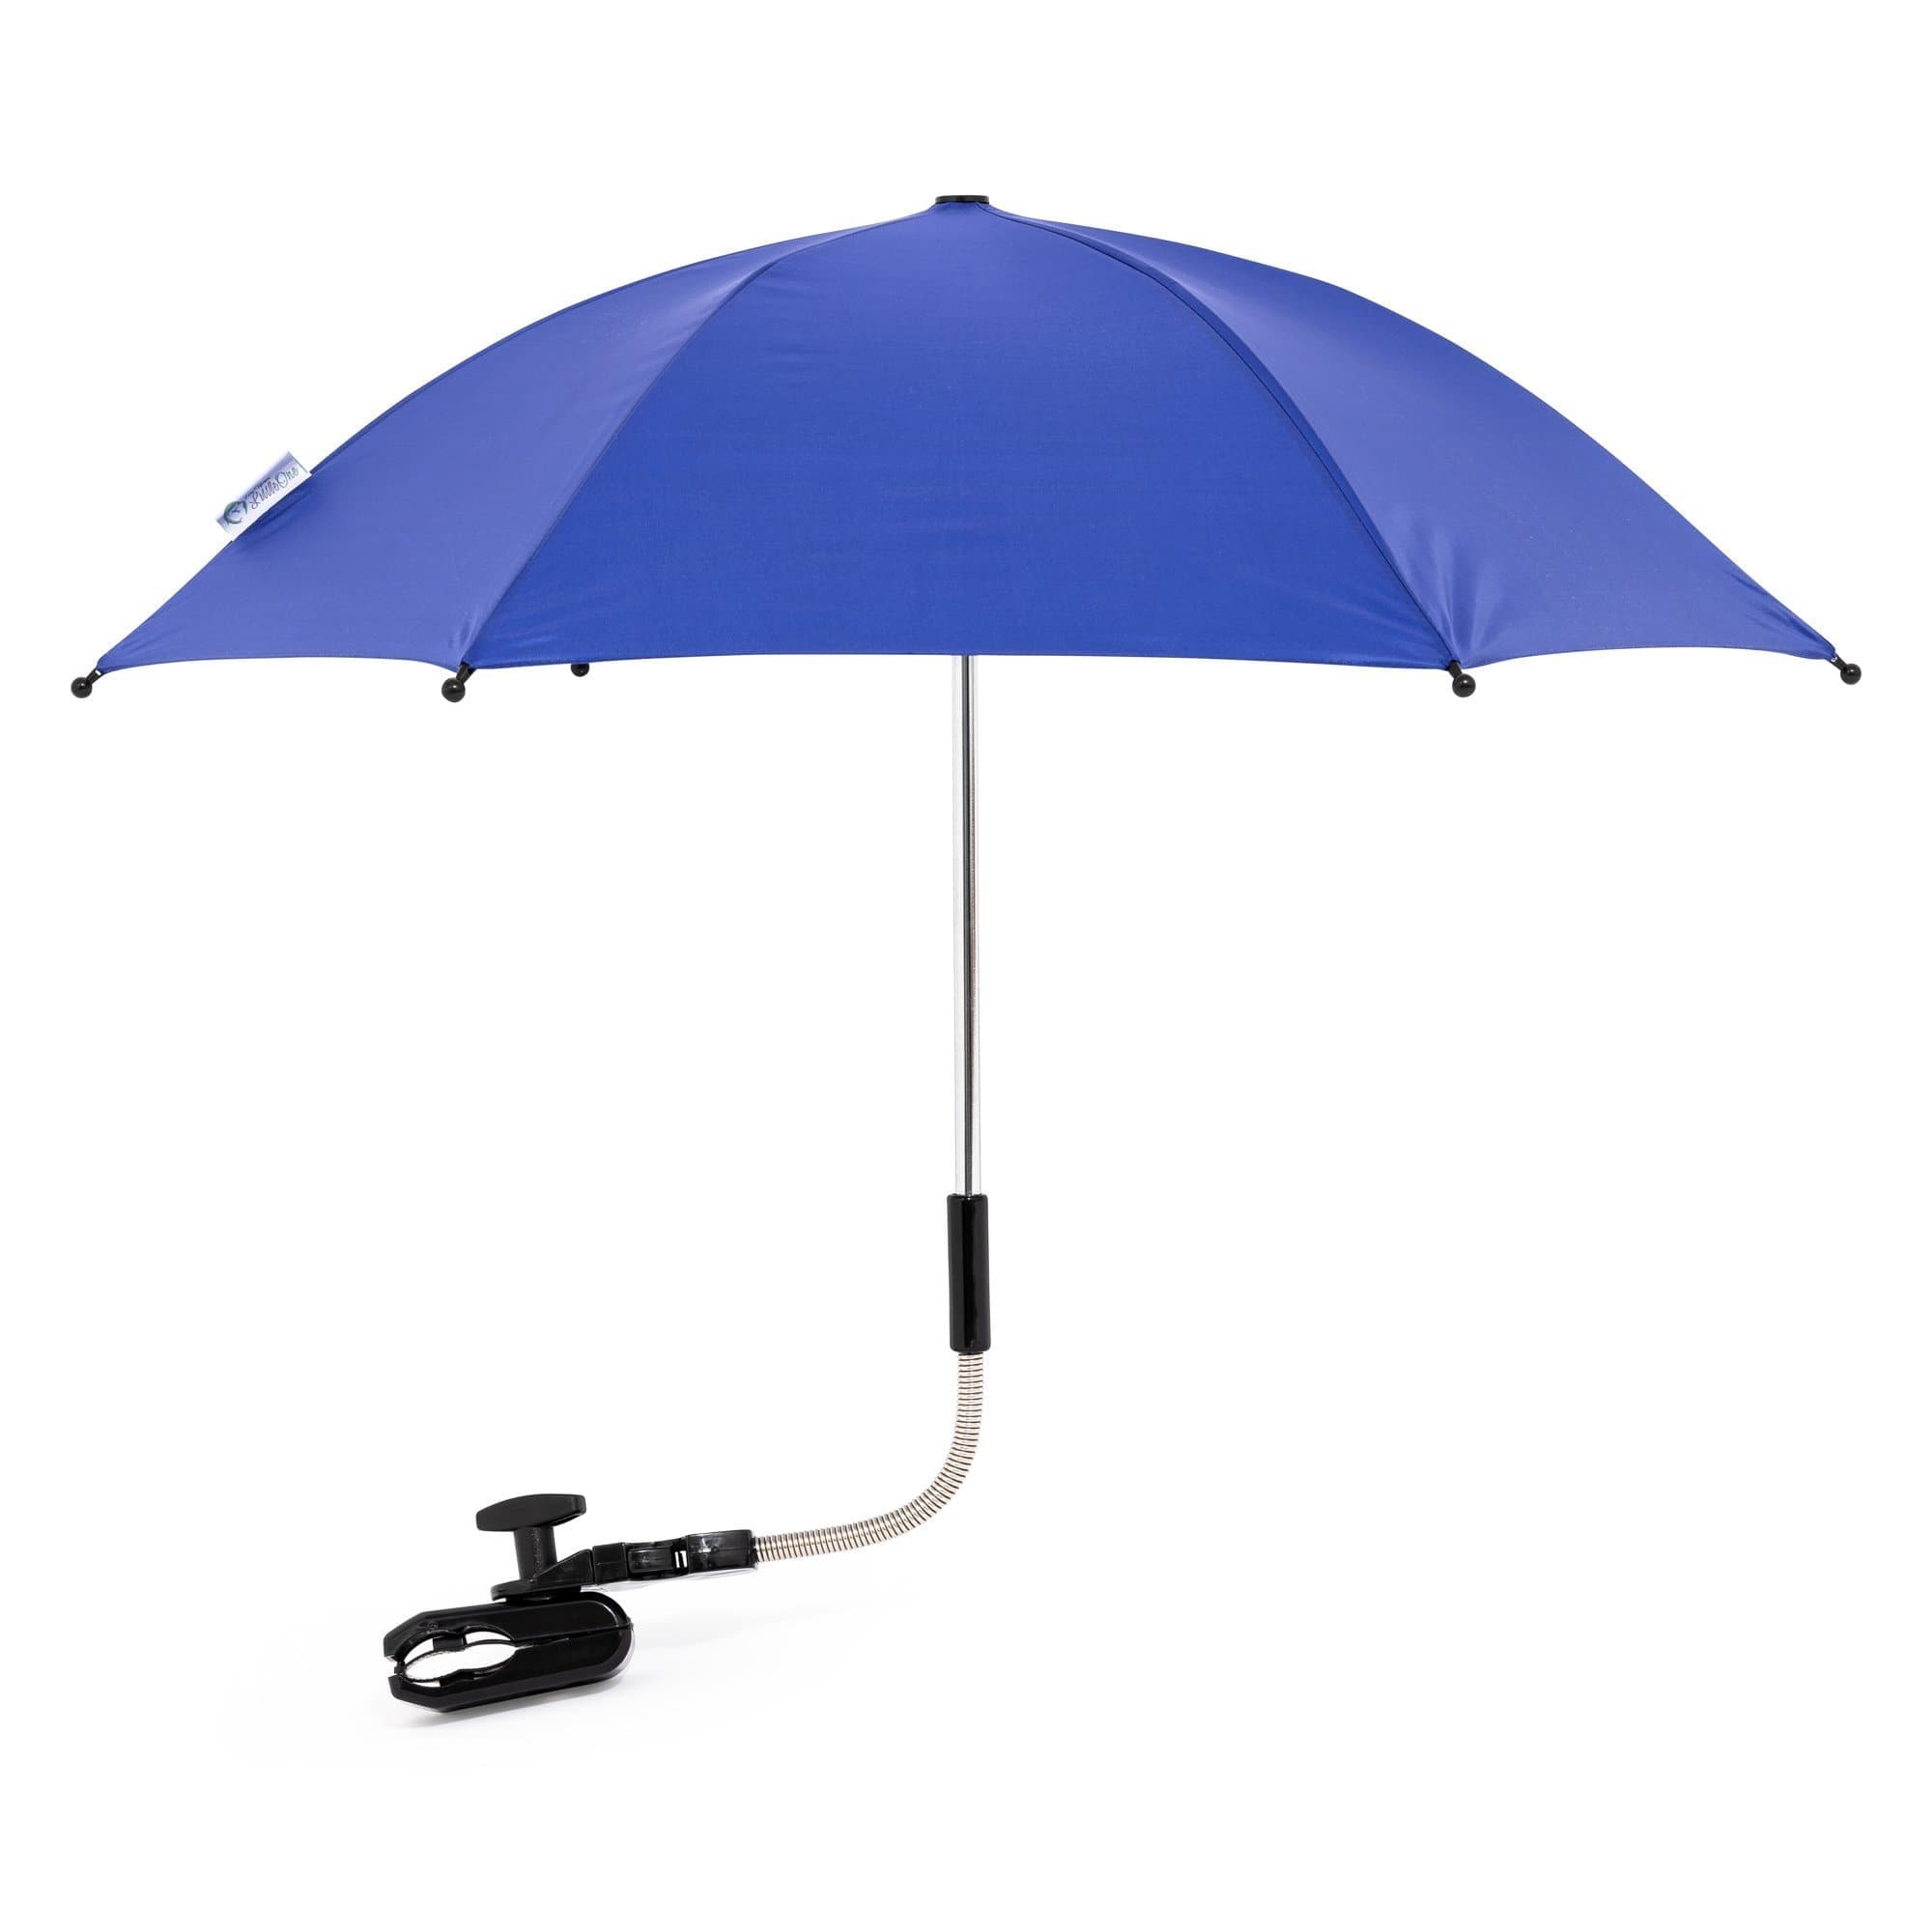 Baby Parasol Compatible With Hartan - Fits All Models - For Your Little One